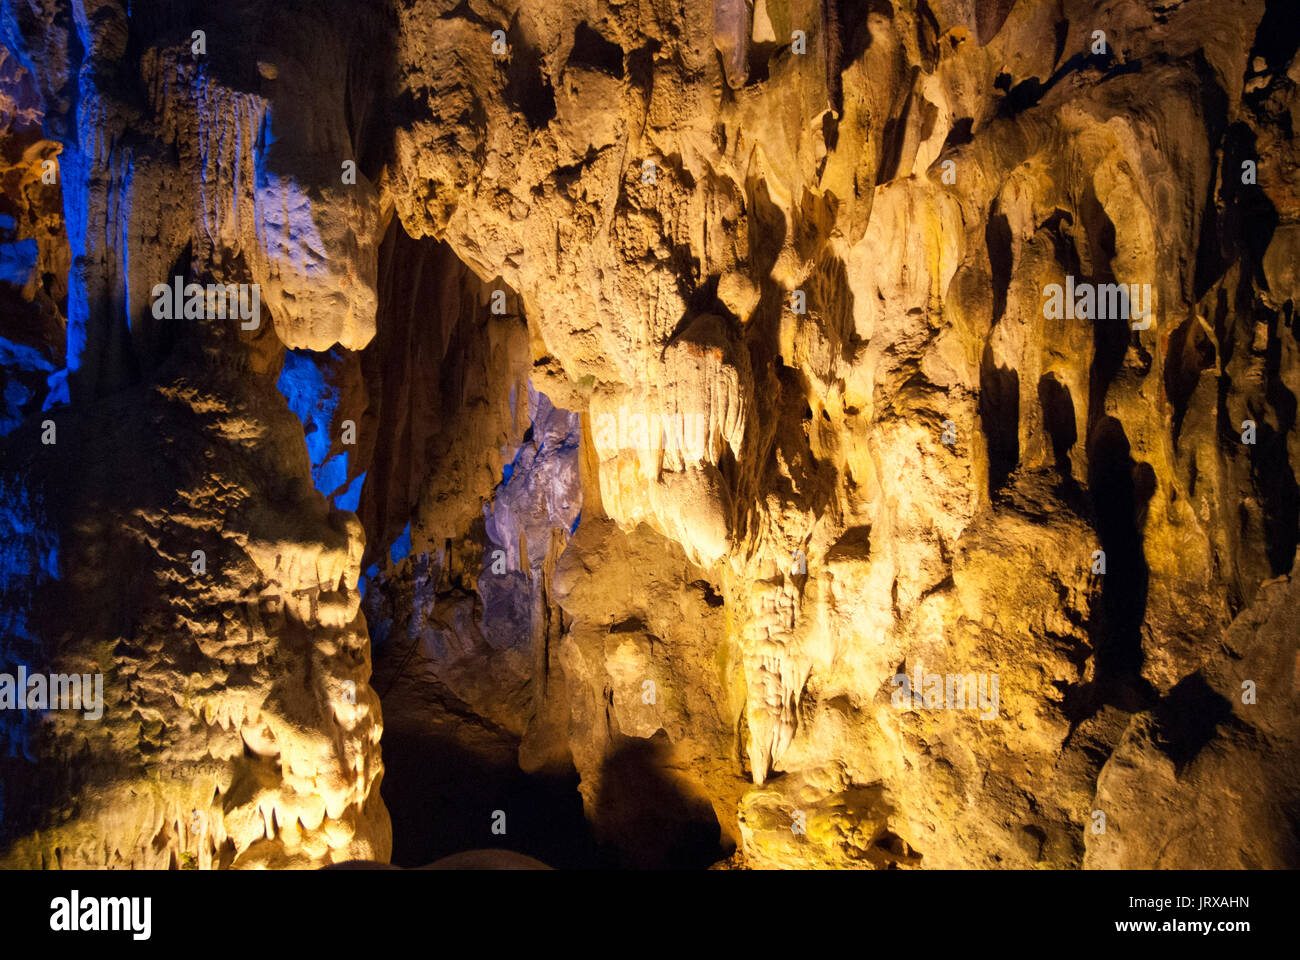 Hang Sung Sot, Cave of Surprises, stalactite cave in Halong Bay, Vietnam, Southeast Asia. Hang Sung Sot or Surprise Grotto - Bo Hon Island - Halong Ba Stock Photo